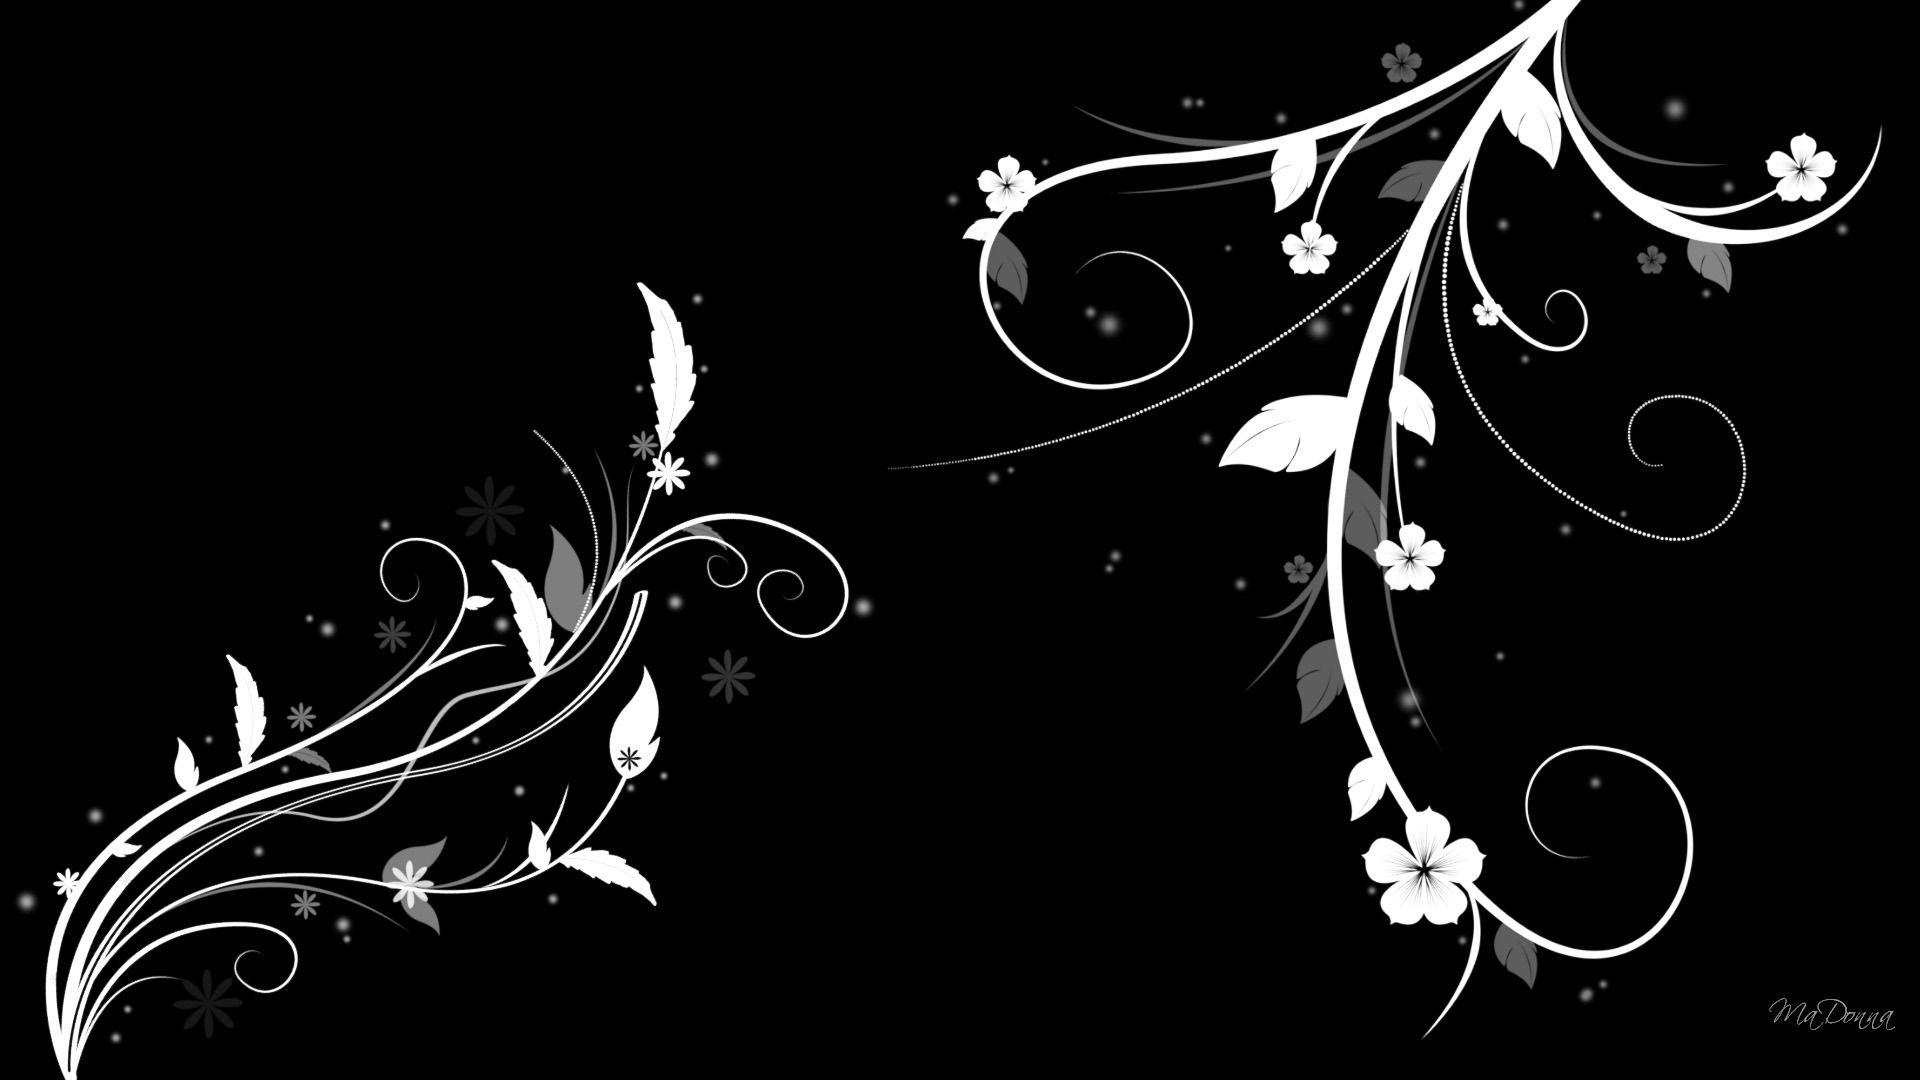 Abstract Art Black And White Wallpaper Cool Free